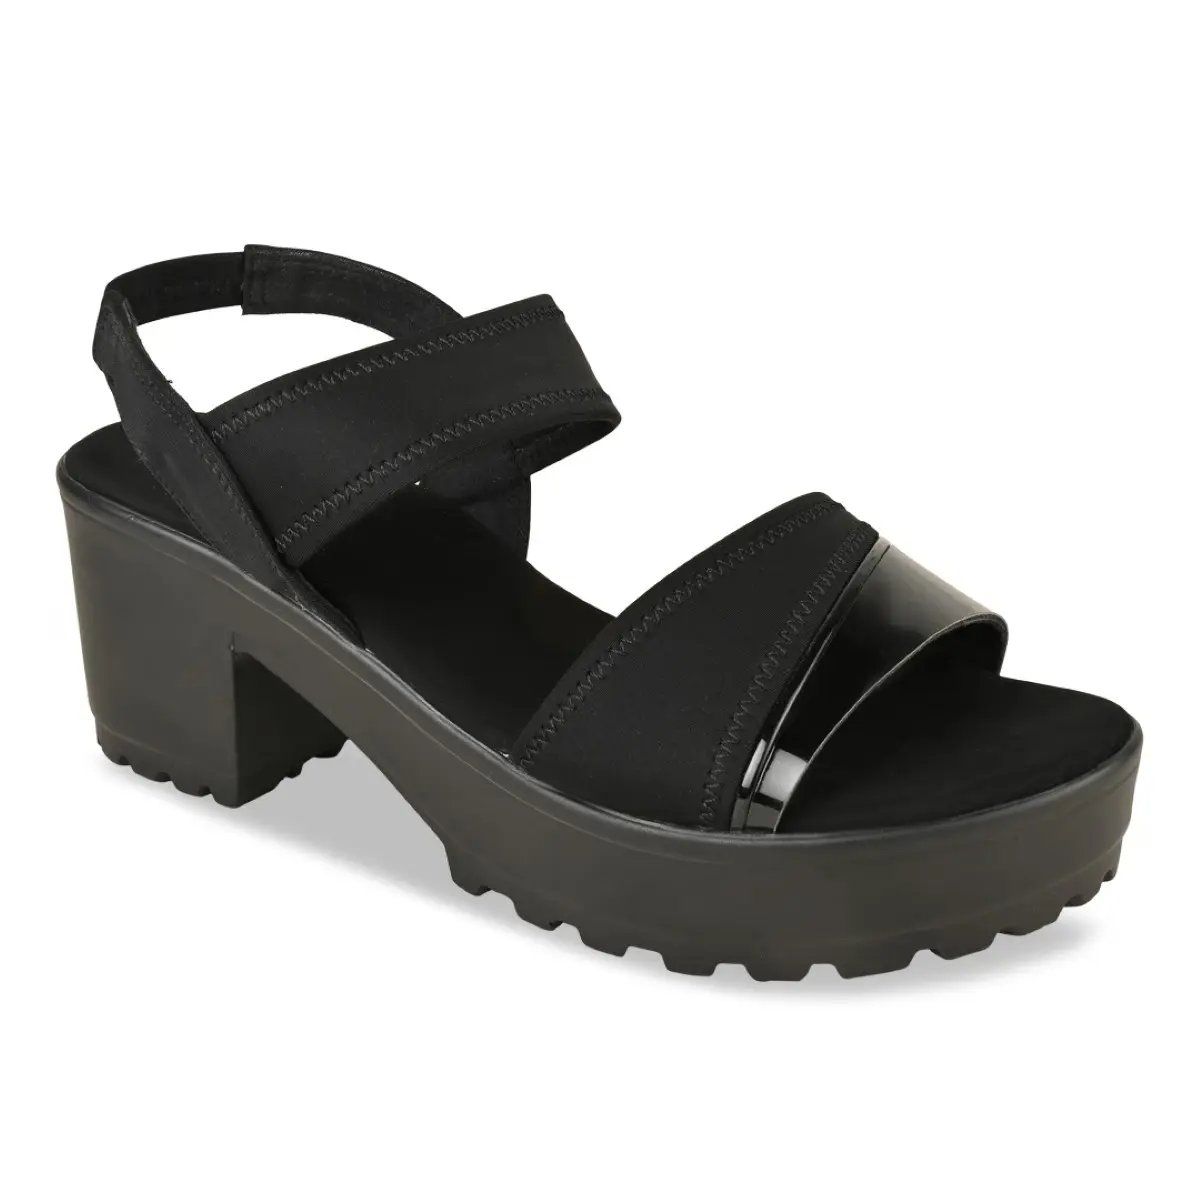 Vic Matie strappy platform sandals price in Egypt | Compare Prices